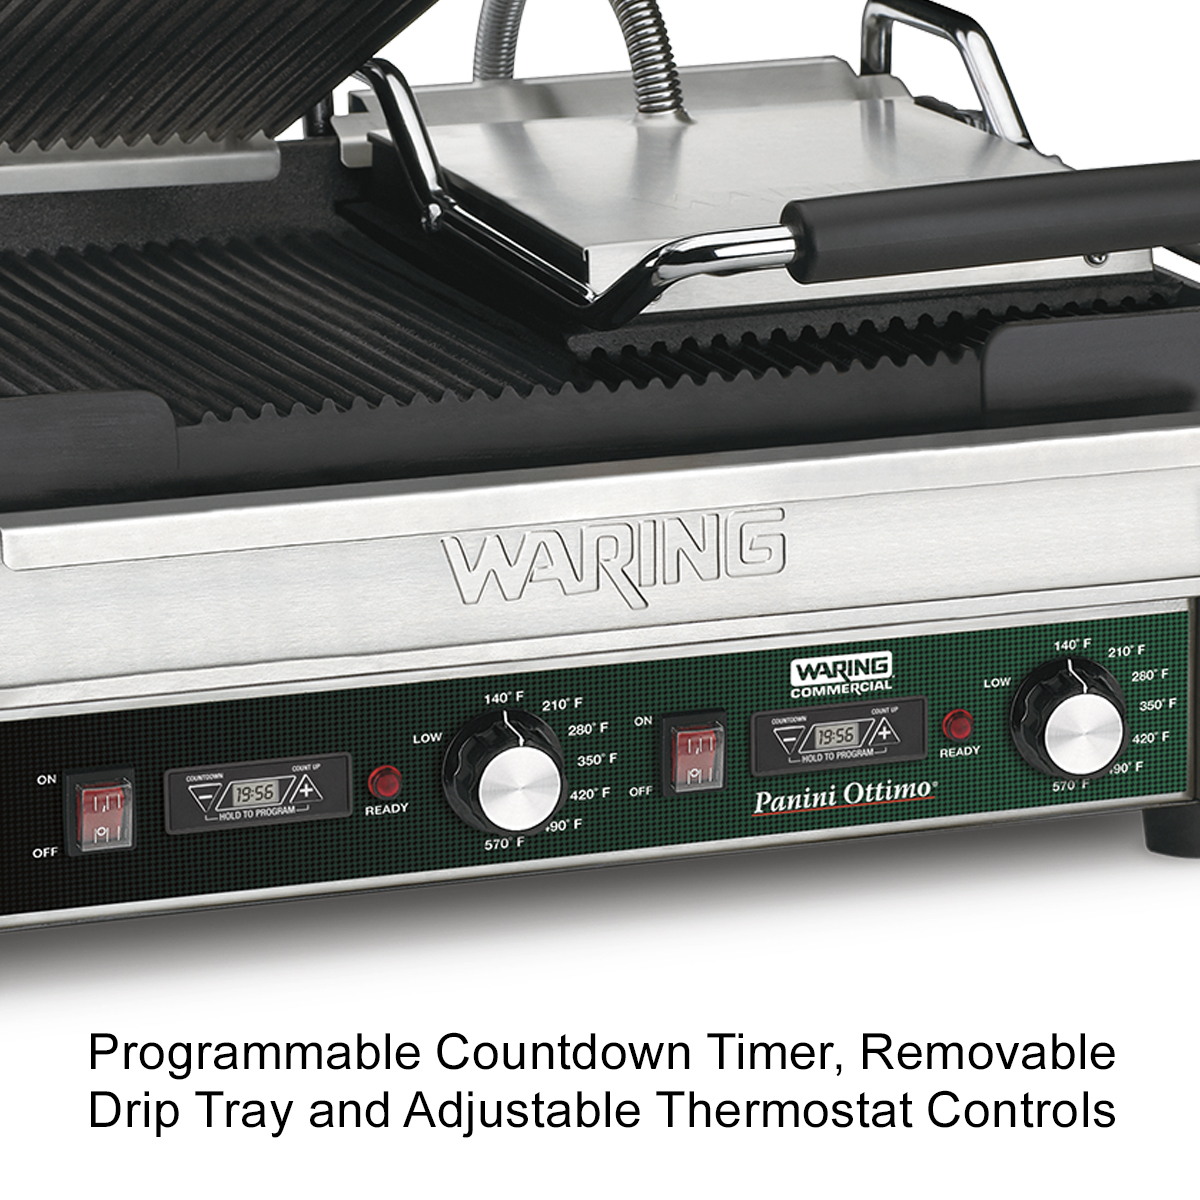 https://www.waringcommercialproducts.com/files/products/wpg300t-waring-panini-grill-inset3.jpg